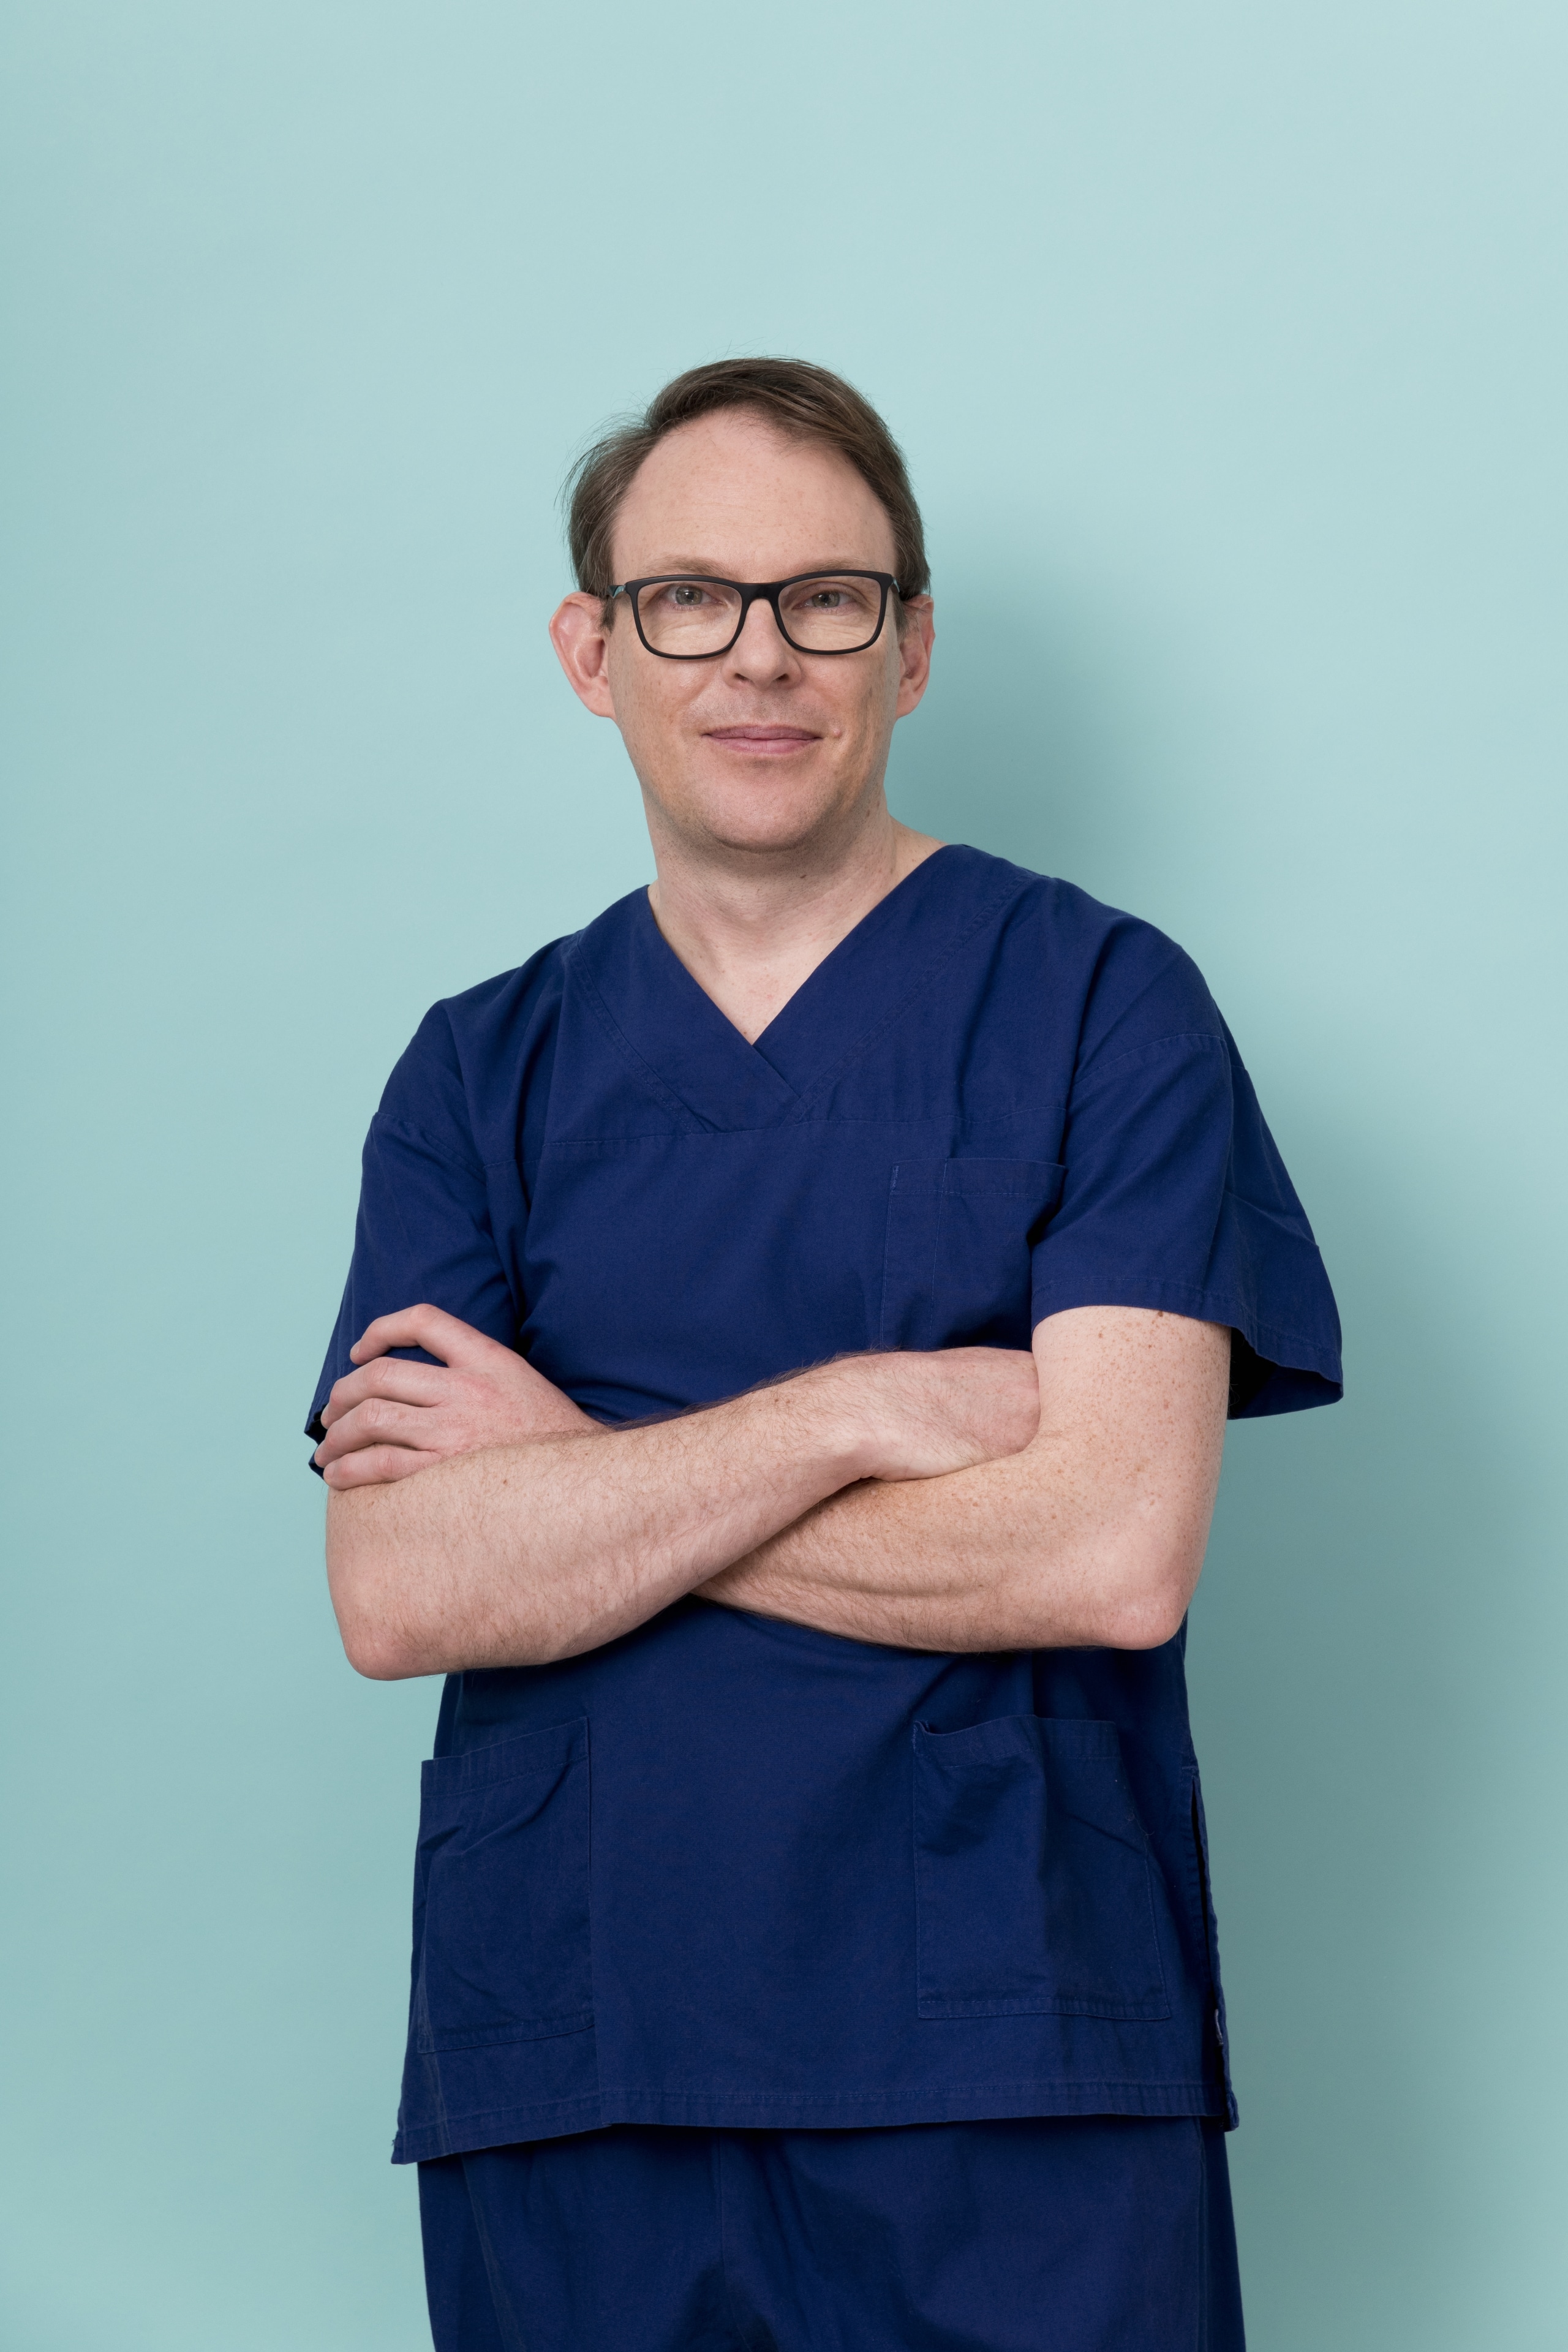 Portrait of male obstetrician wearing scrubs against a teal background